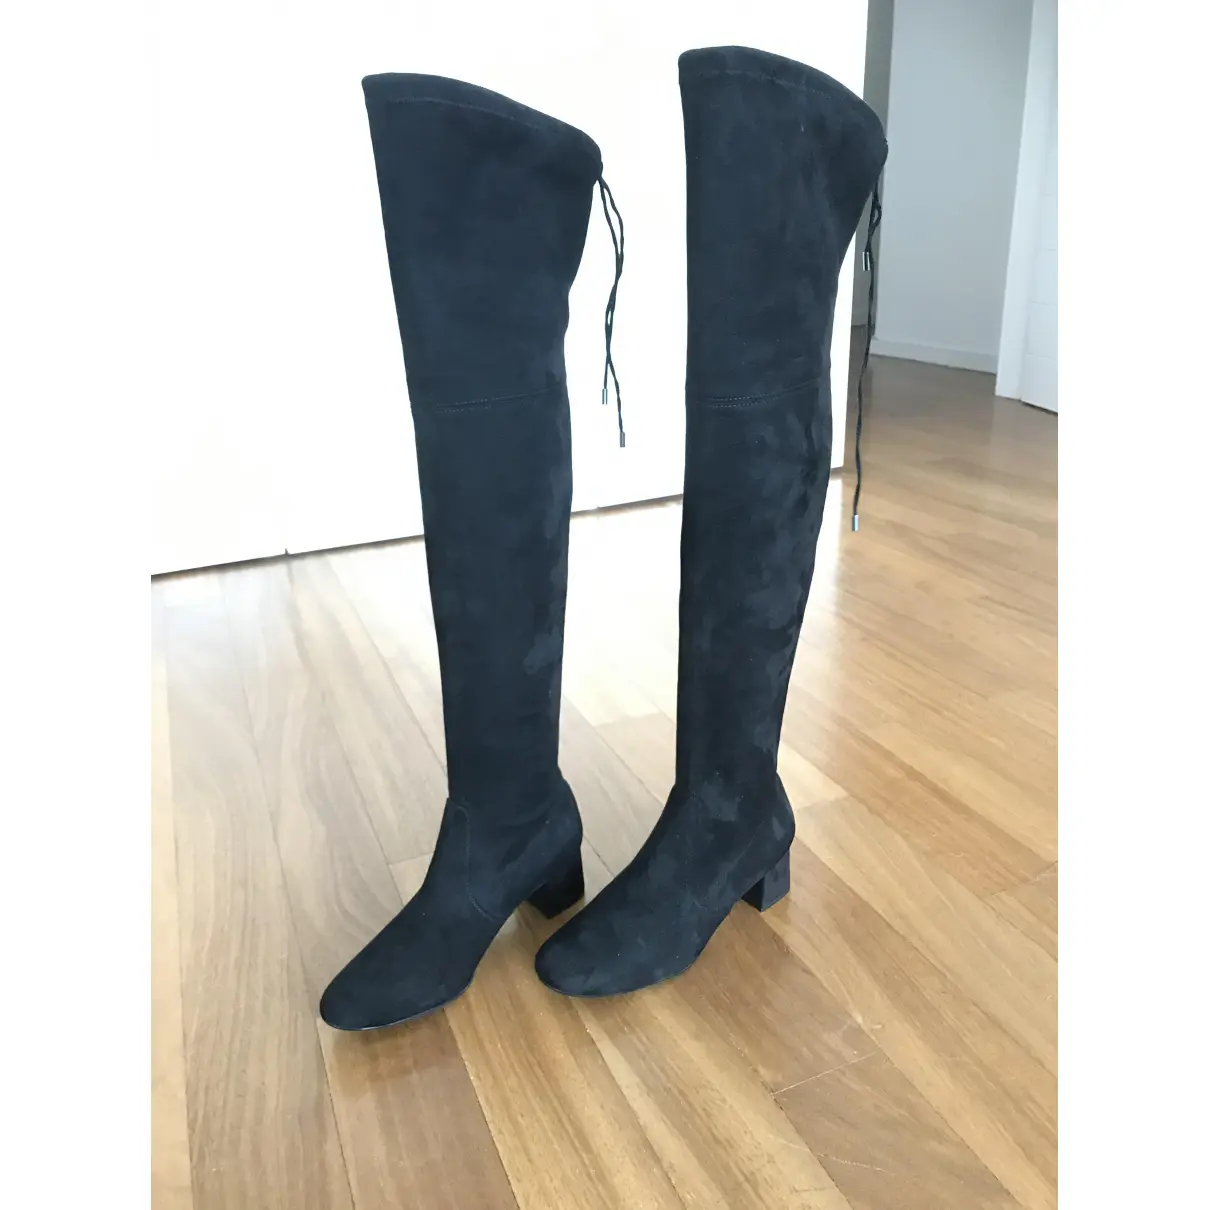 Buy Unisa Riding boots online